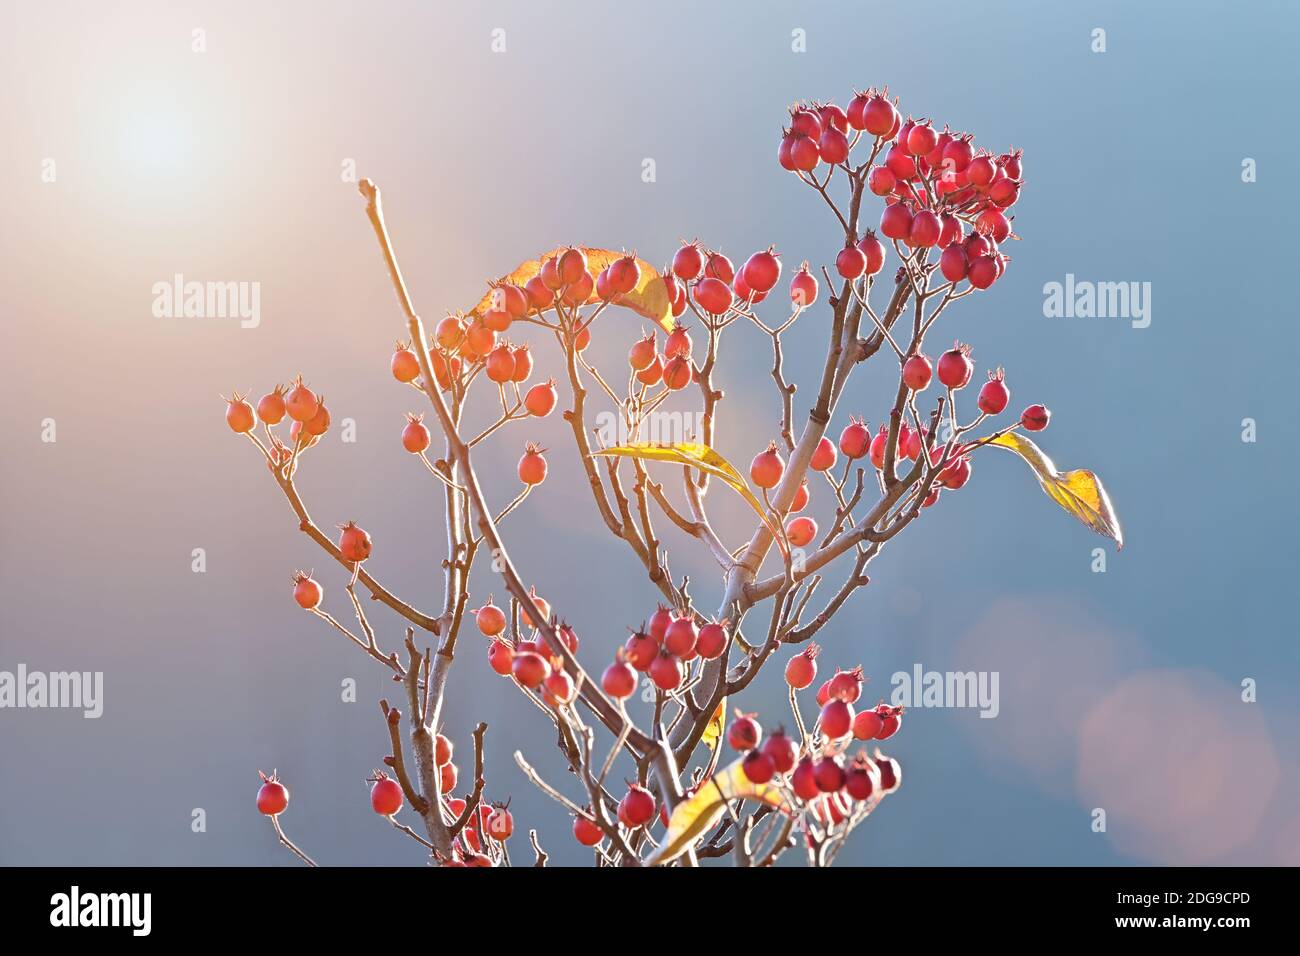 Sorbus aria, the whitebeam deciduous tree with scarlet berries in December. Stock Photo